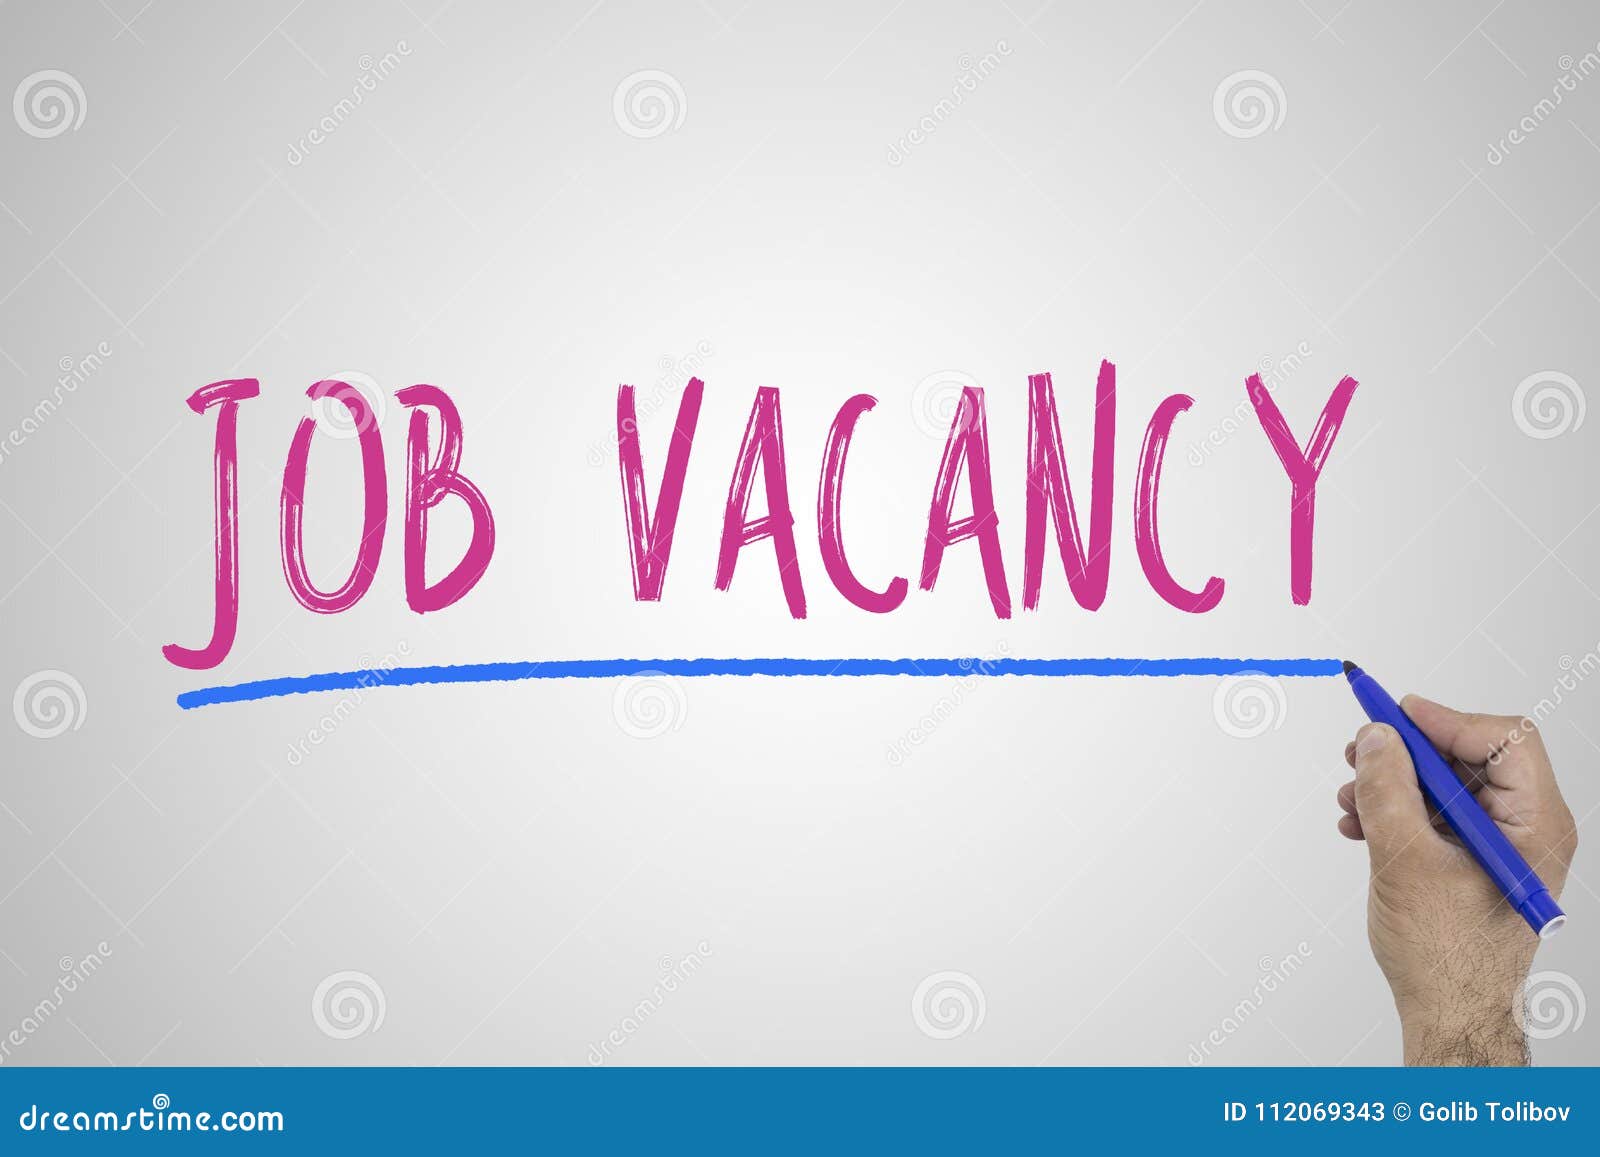 Job Career Hiring Recruitment On White Board Stock Image Image Of Interview Search 112069343